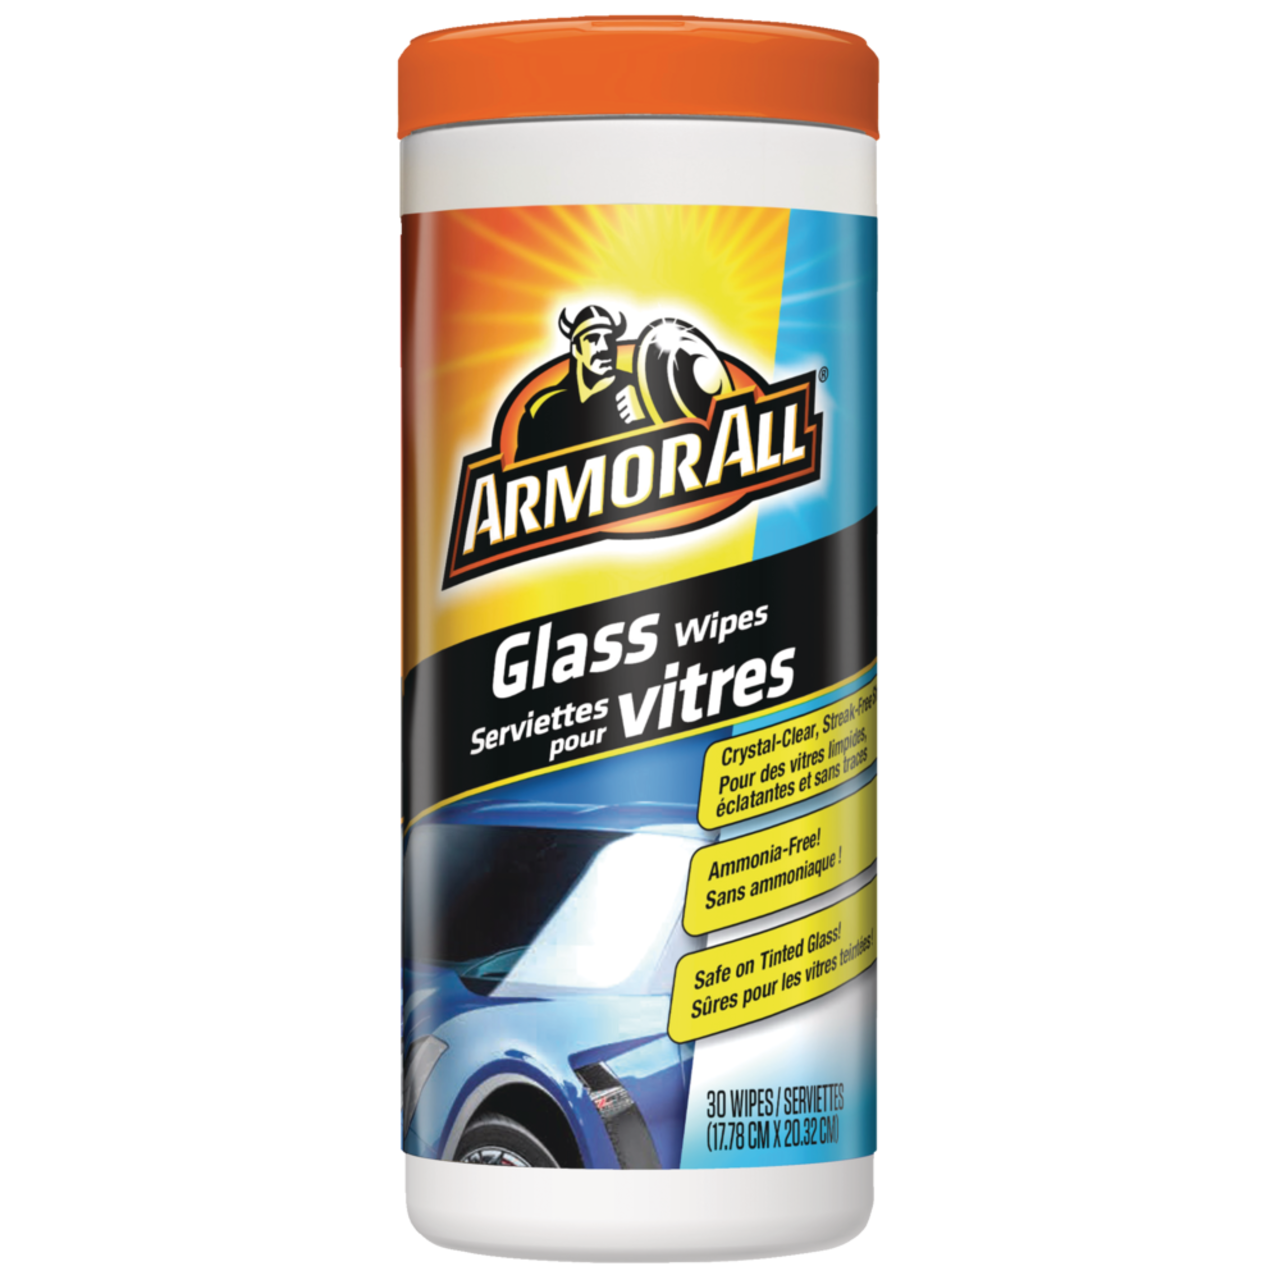 https://media-www.canadiantire.ca/product/automotive/car-care-accessories/auto-cleaning-chemicals/0390456/armor-all-glass-cleaning-wipes-d485189d-402f-487c-8443-79ea261b7003.png?imdensity=1&imwidth=640&impolicy=mZoom